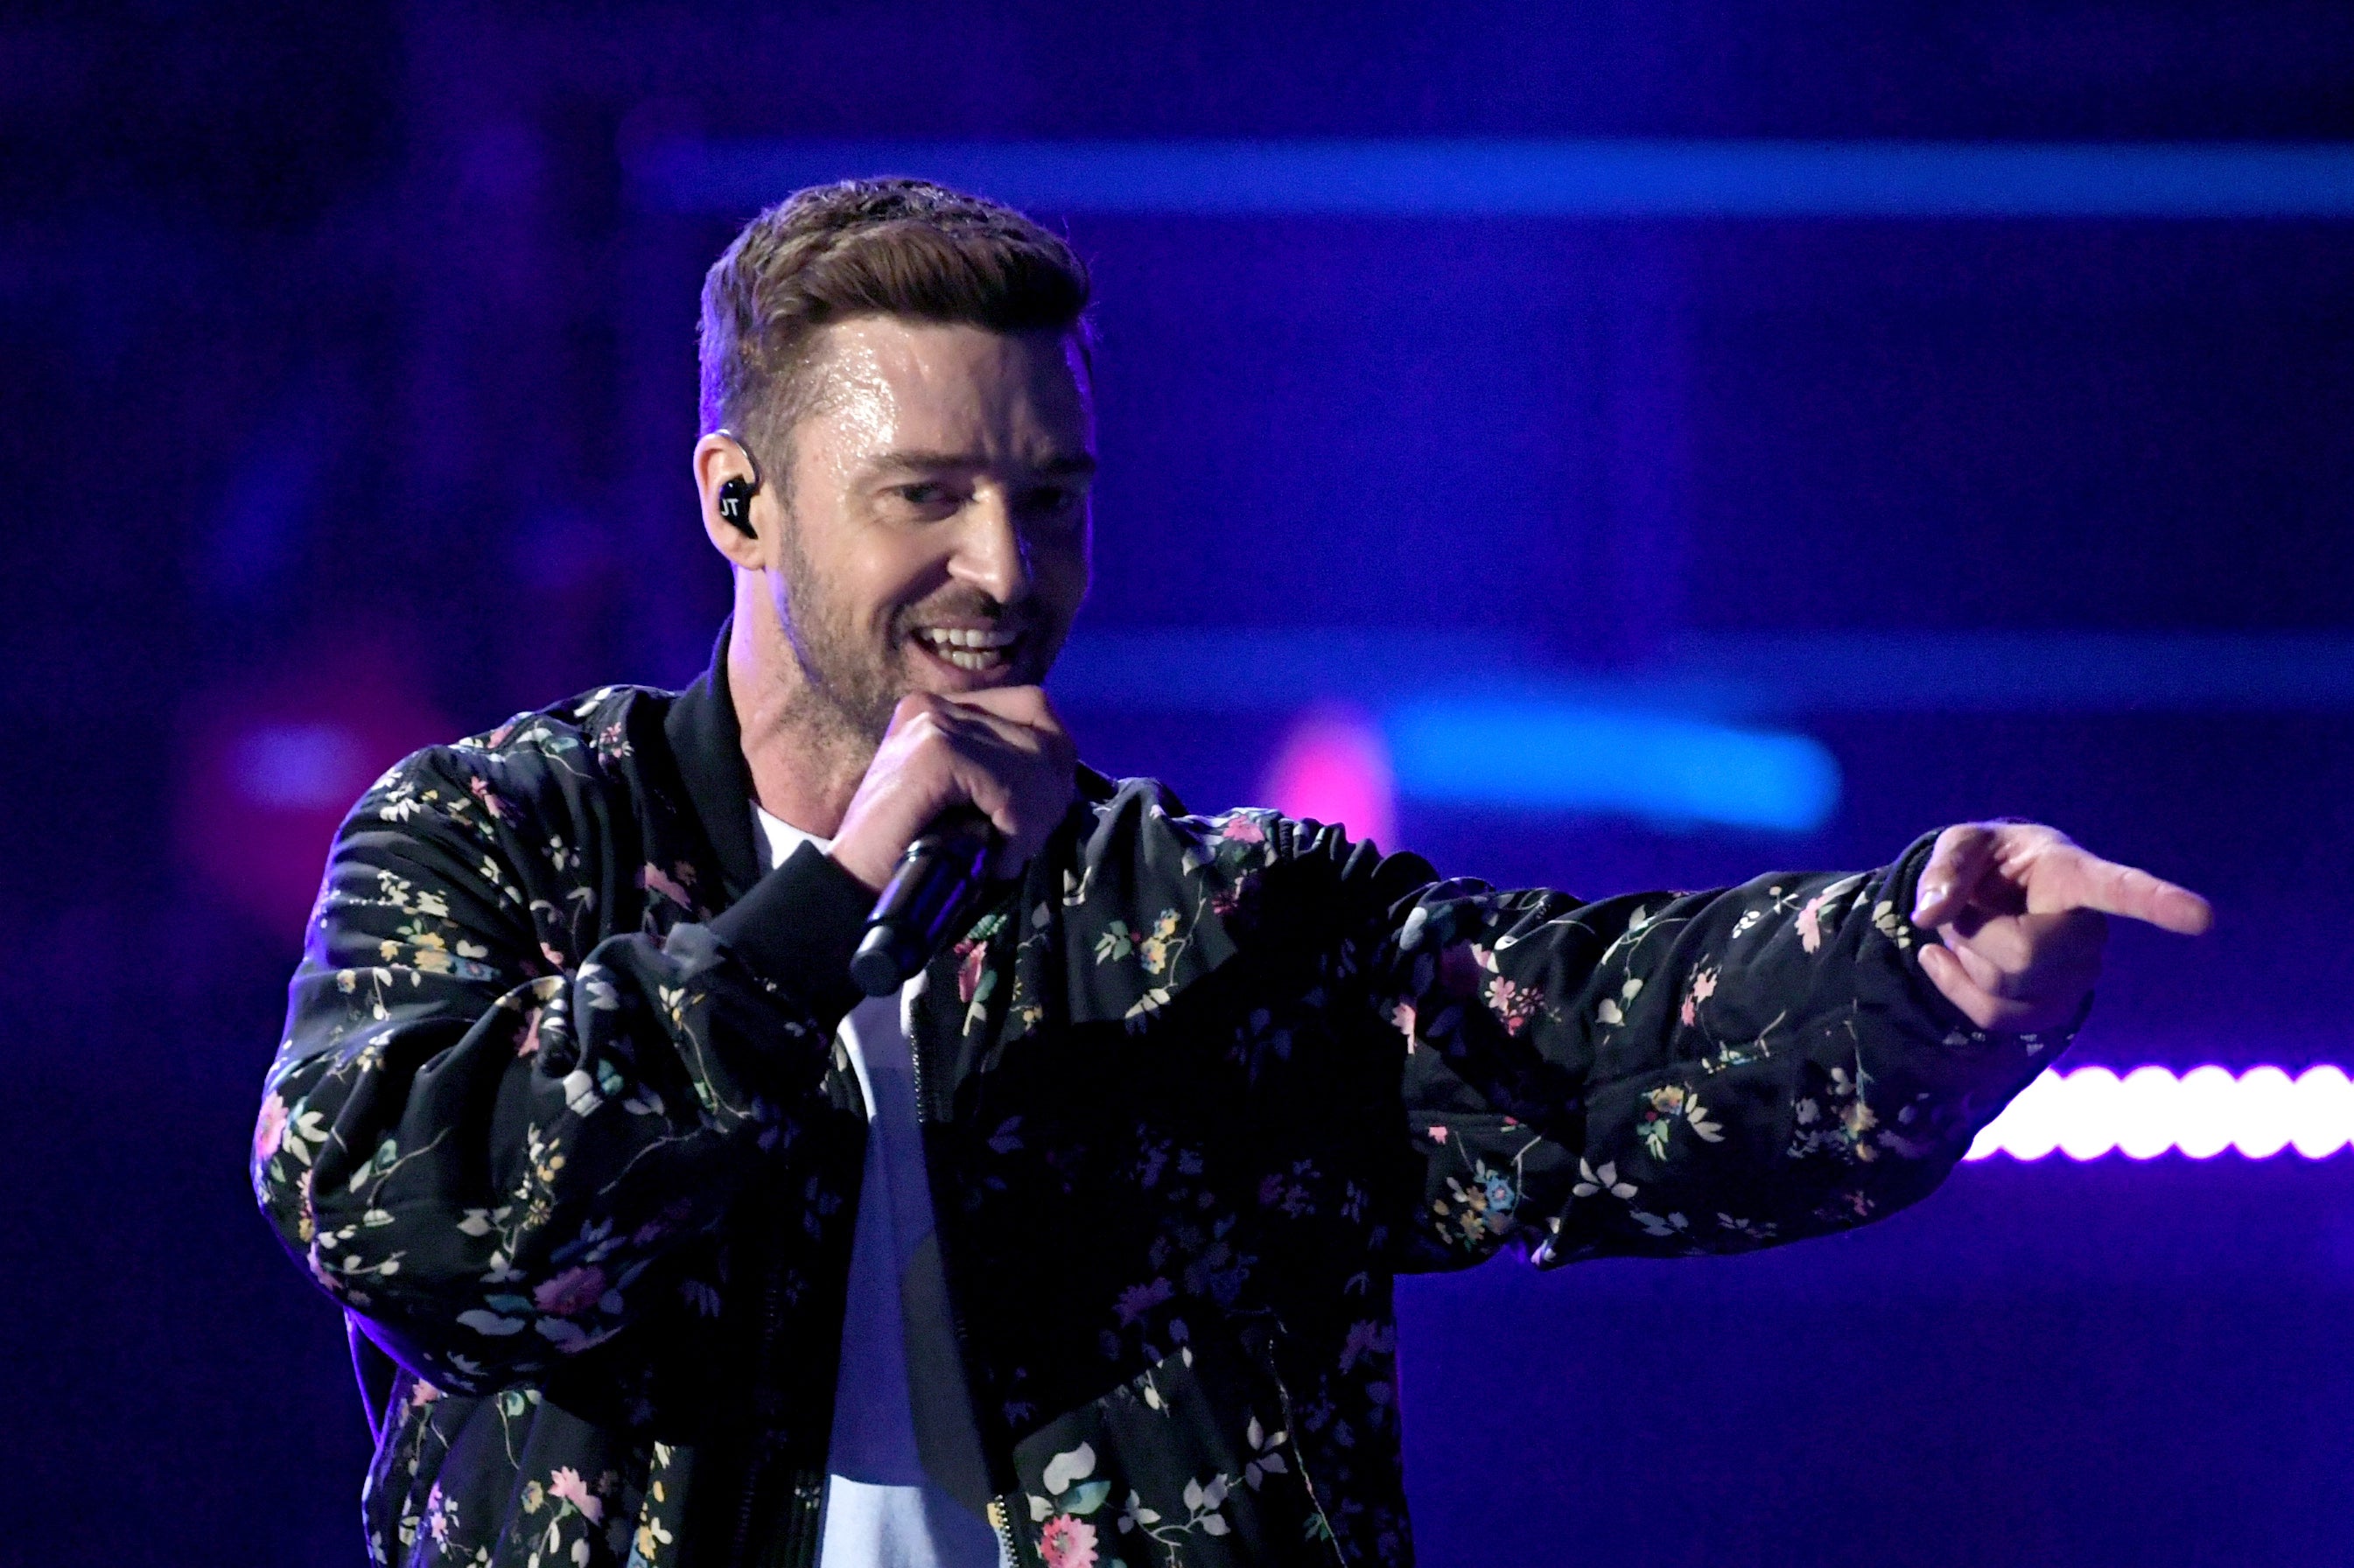 justin timberlake, hamptons, new york, justin timberlake arrested in hamptons enclave sag harbor for driving while intoxicated